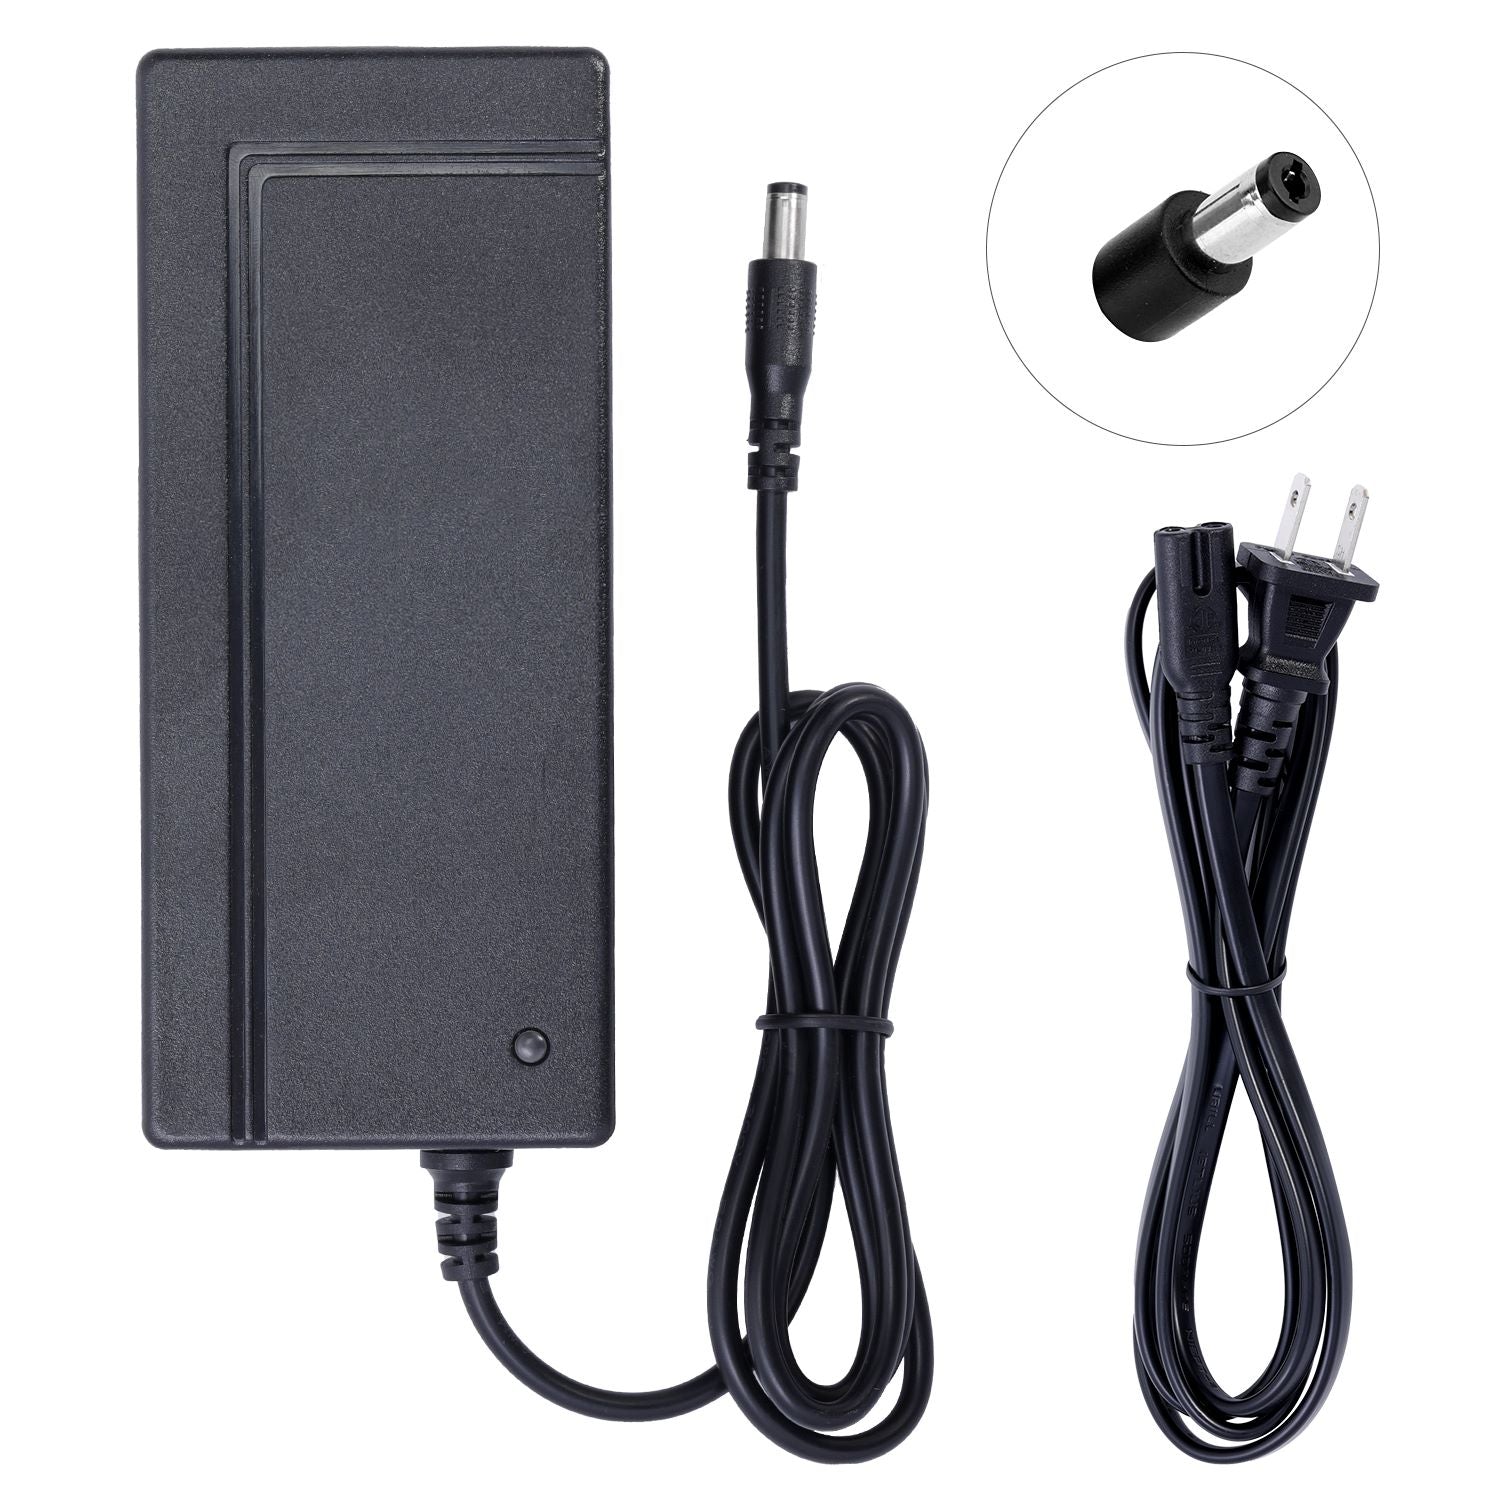 UL Listed Charger for Swagtron EB7 eBike